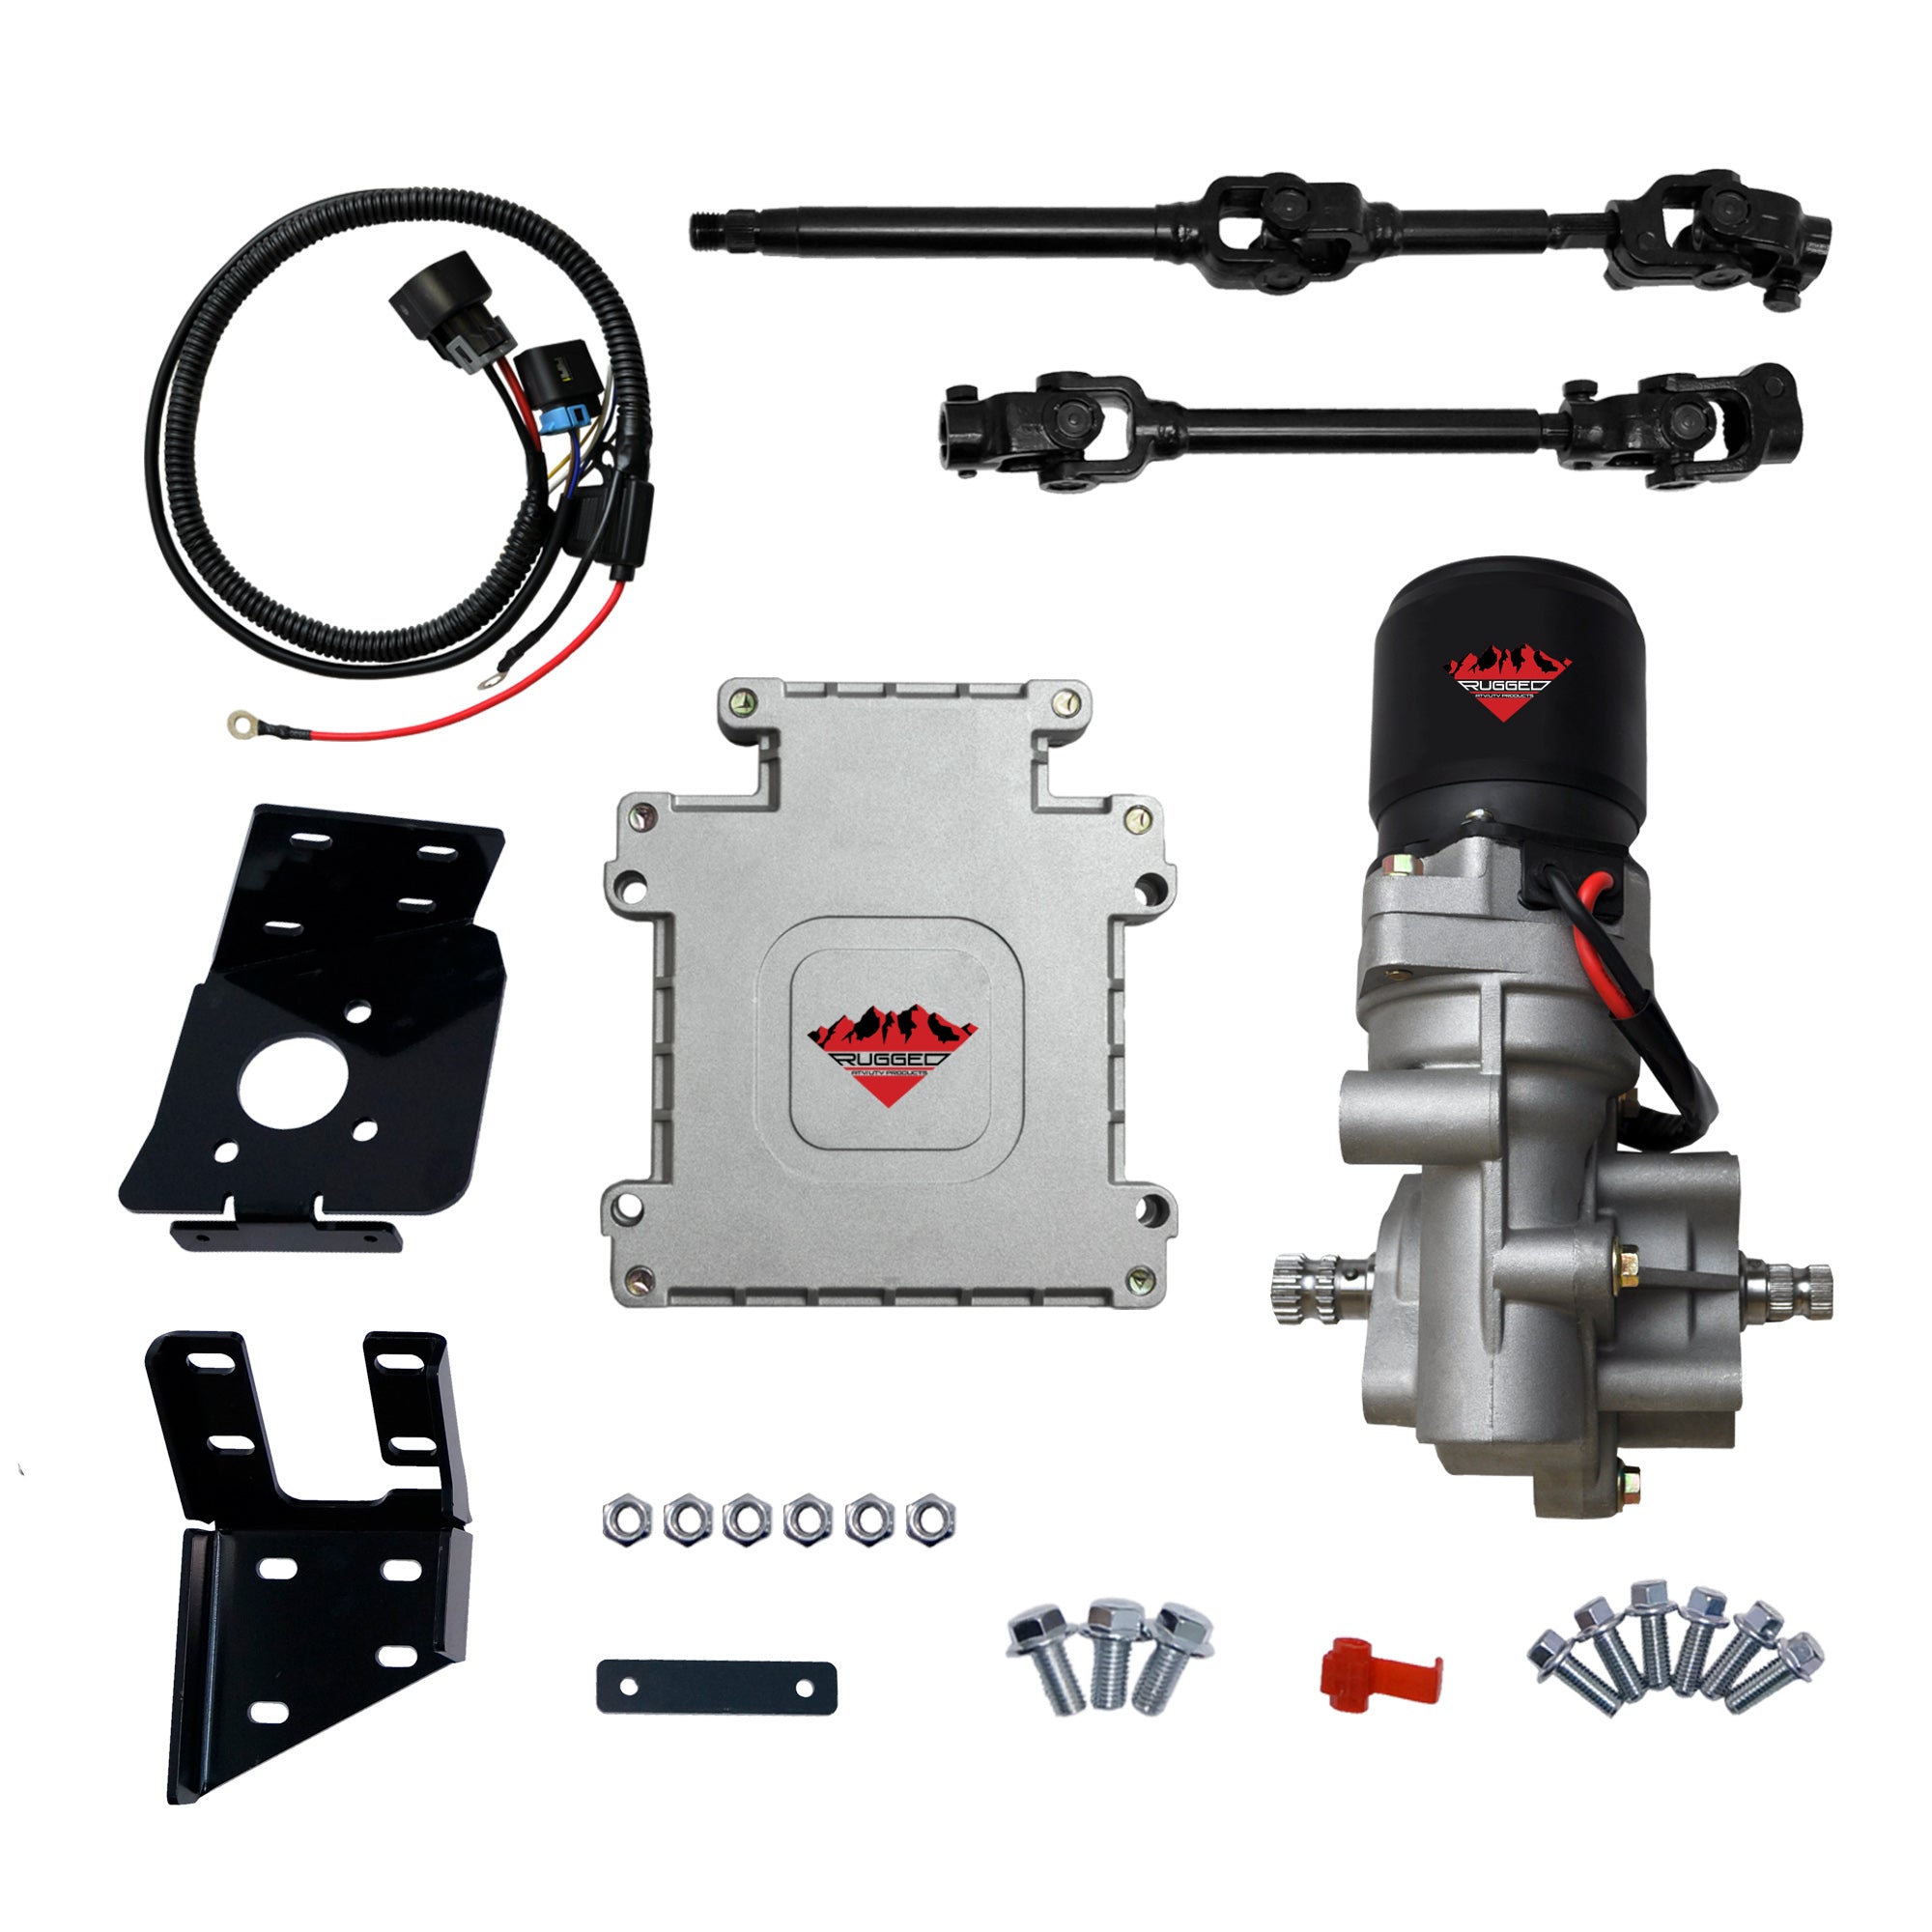 Electric Power Steering Kit for Can Am Outlander 500 Max 